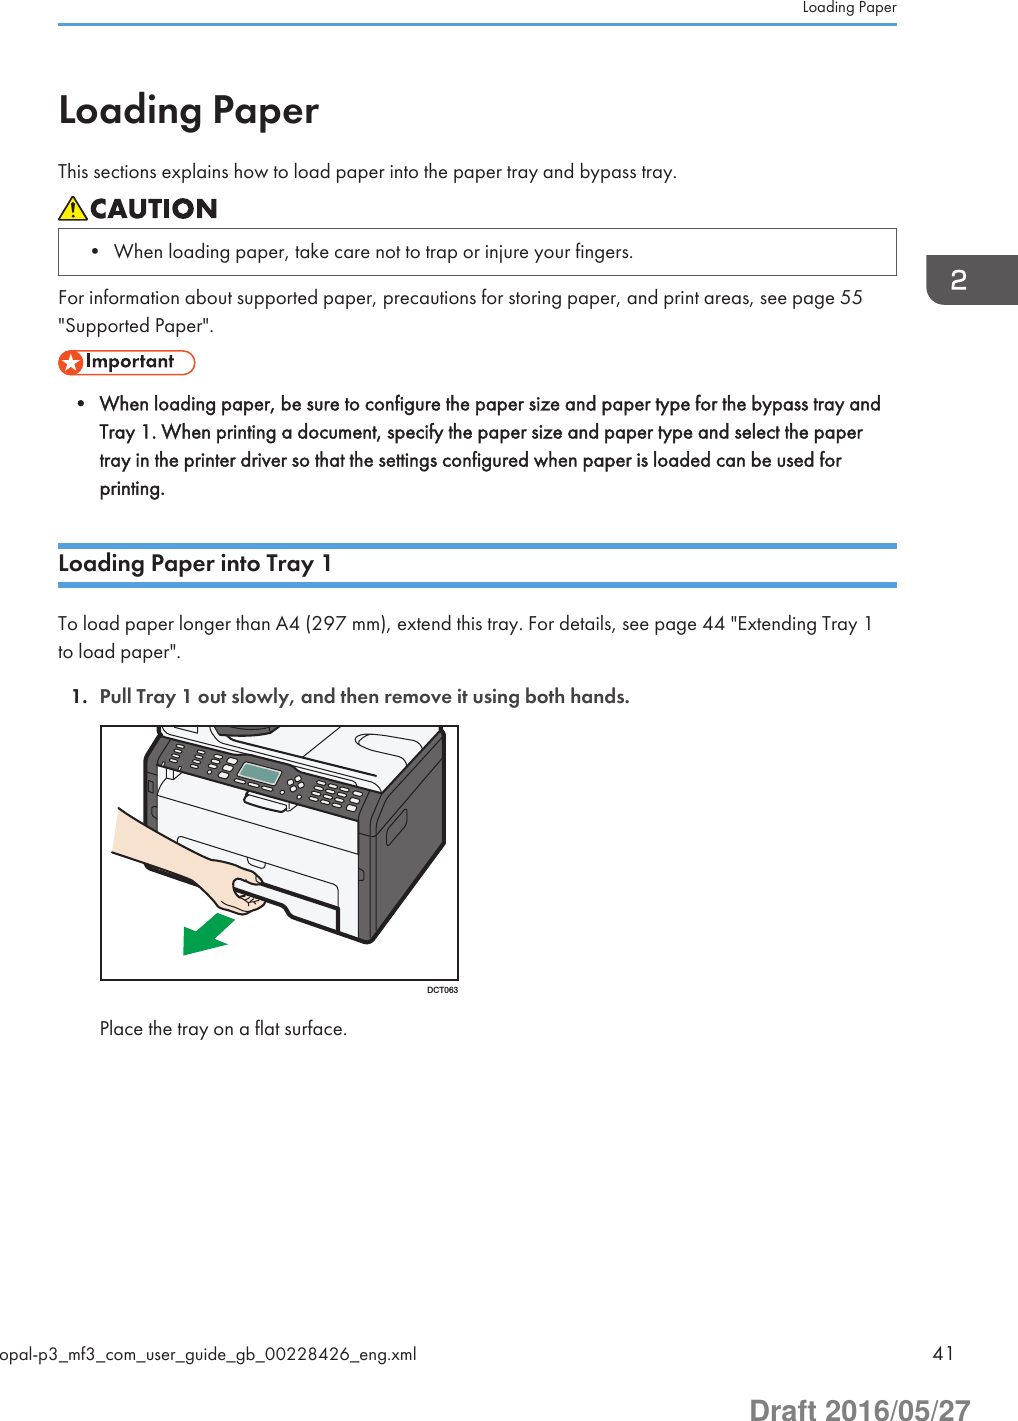 Loading PaperThis sections explains how to load paper into the paper tray and bypass tray.• When loading paper, take care not to trap or injure your fingers.For information about supported paper, precautions for storing paper, and print areas, see page 55&quot;Supported Paper&quot;.• When loading paper, be sure to configure the paper size and paper type for the bypass tray andTray 1. When printing a document, specify the paper size and paper type and select the papertray in the printer driver so that the settings configured when paper is loaded can be used forprinting.Loading Paper into Tray 1To load paper longer than A4 (297 mm), extend this tray. For details, see page 44 &quot;Extending Tray 1to load paper&quot;.1. Pull Tray 1 out slowly, and then remove it using both hands.DCT063Place the tray on a flat surface.Loading Paperopal-p3_mf3_com_user_guide_gb_00228426_eng.xml 41Draft 2016/05/27